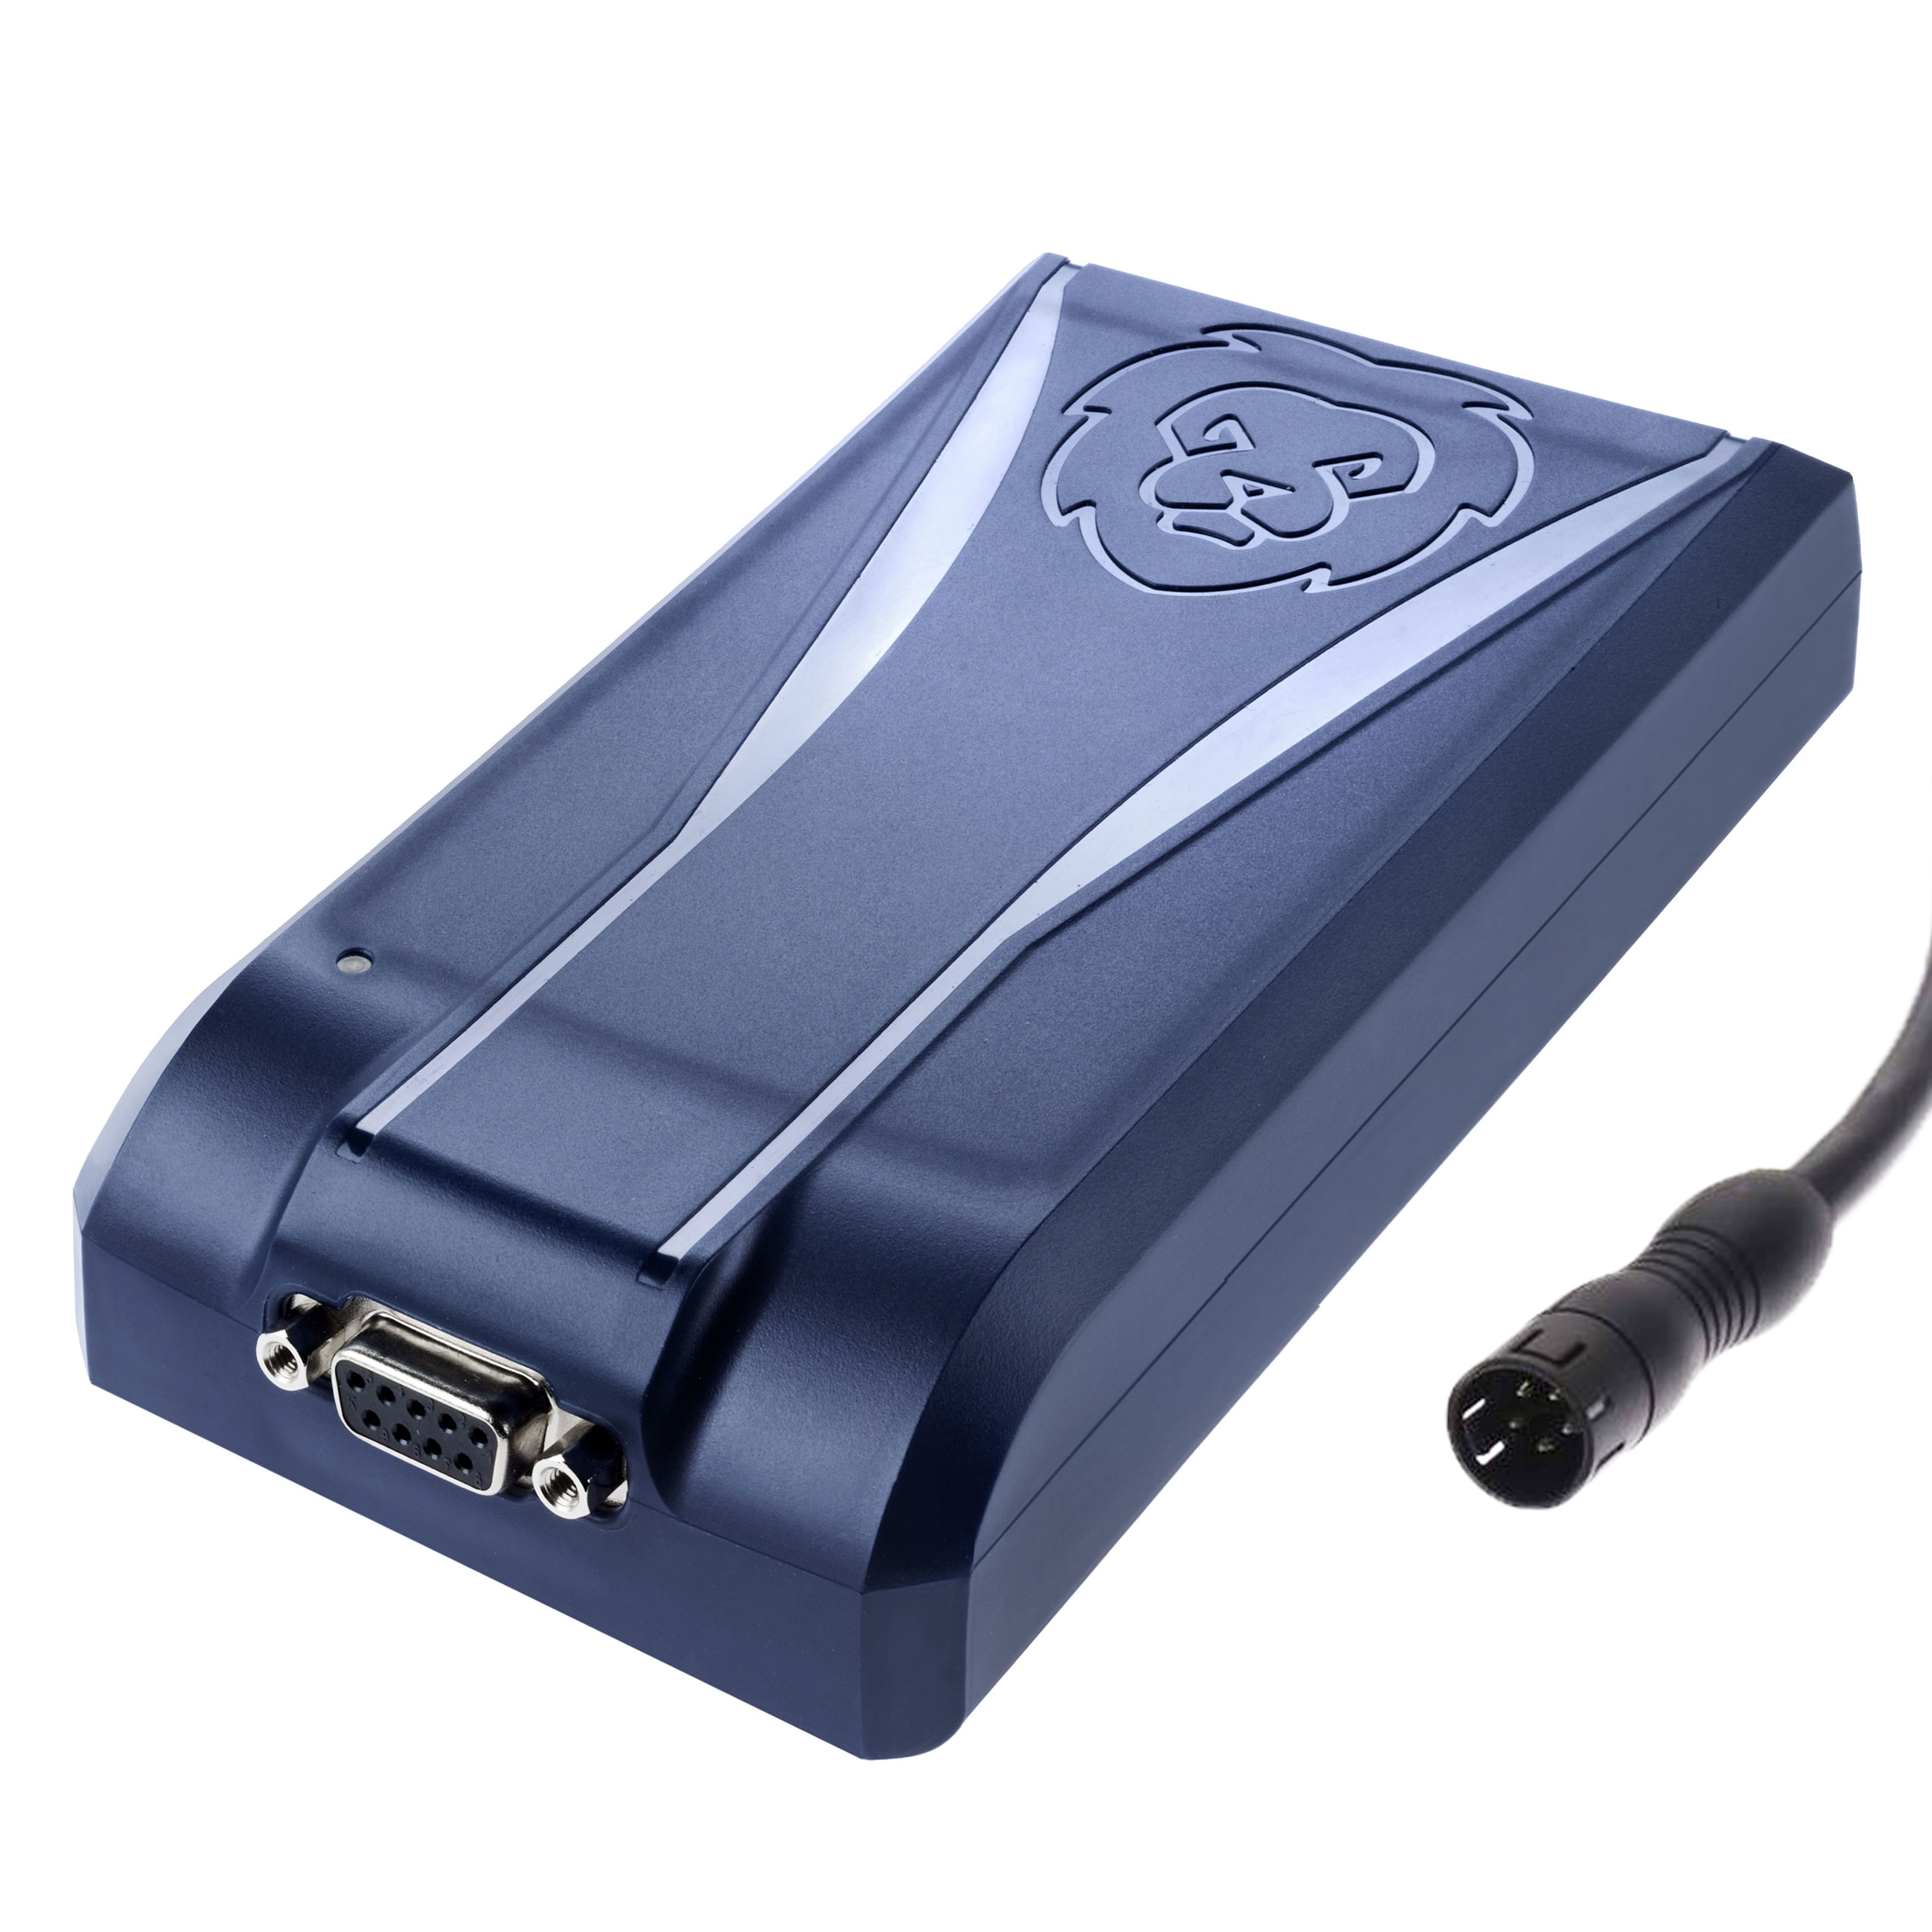 ONgineer LiON Smart Charger with Binder 5-pin EU (socket Europe)